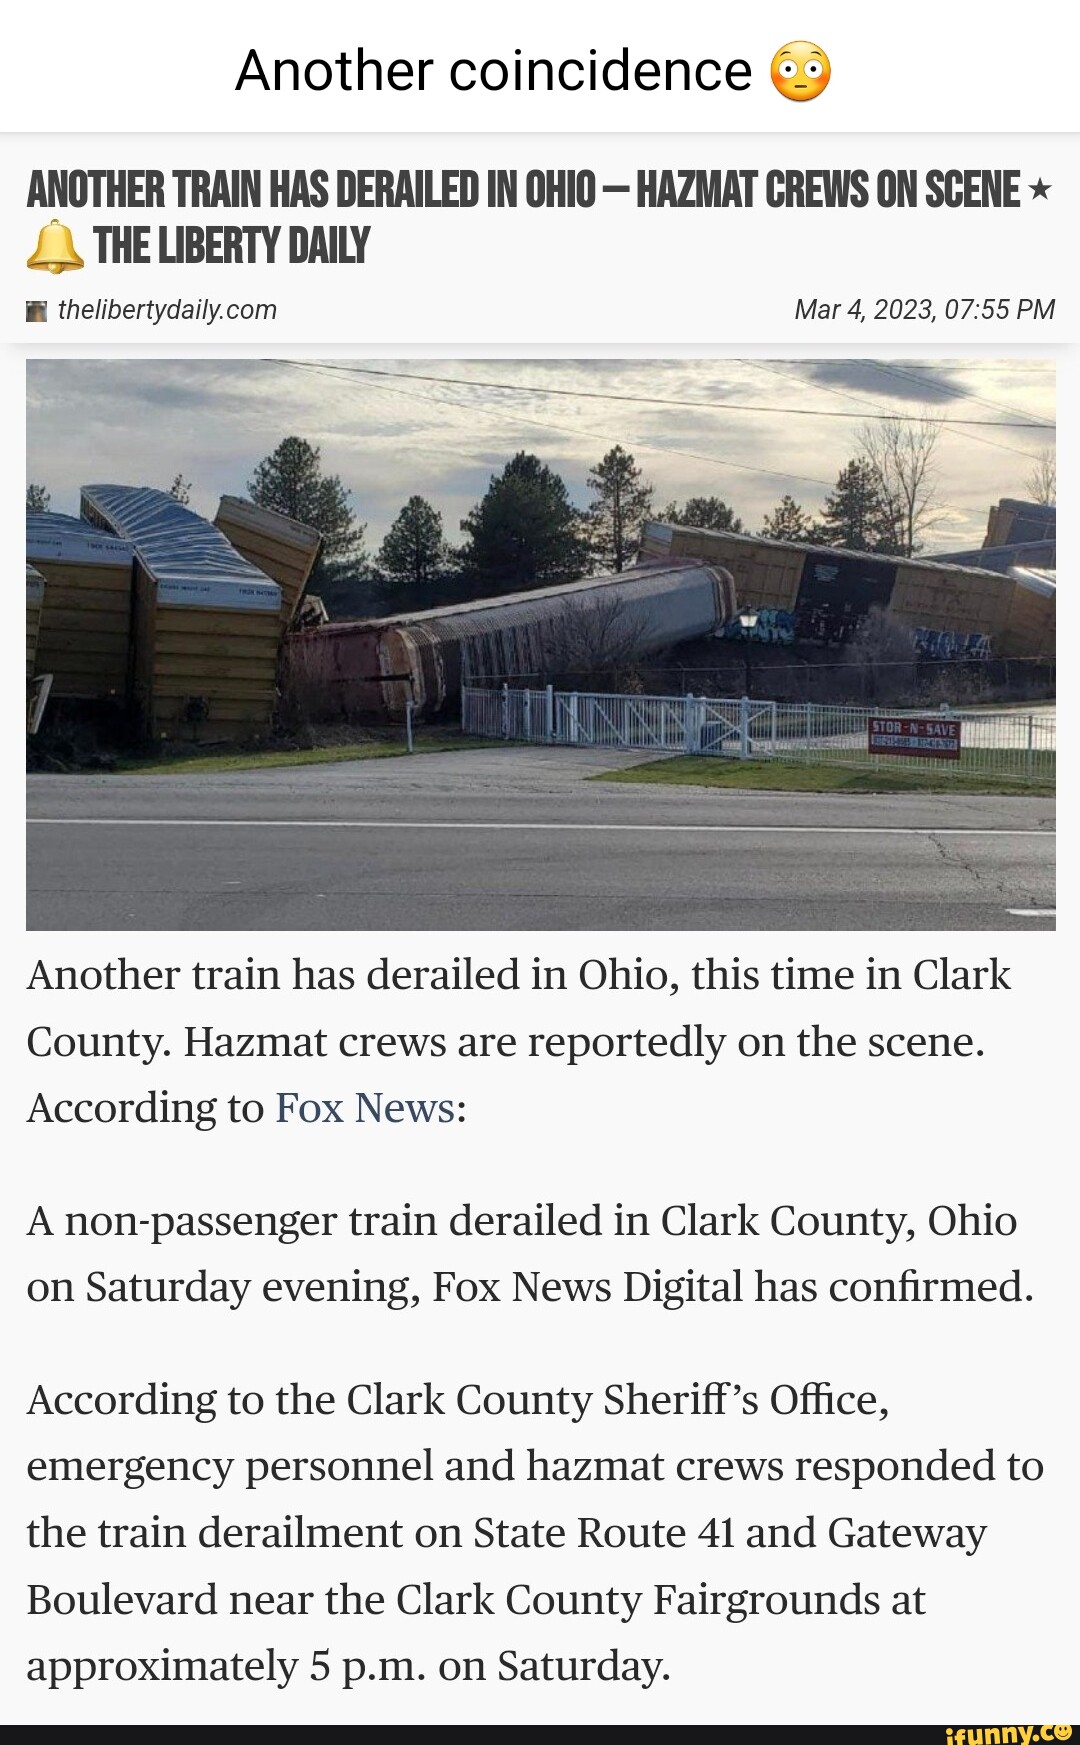 Another Coincidence Another Train Has Derailed In Ohio Hazmat Crews On Scene The Liberty Daily